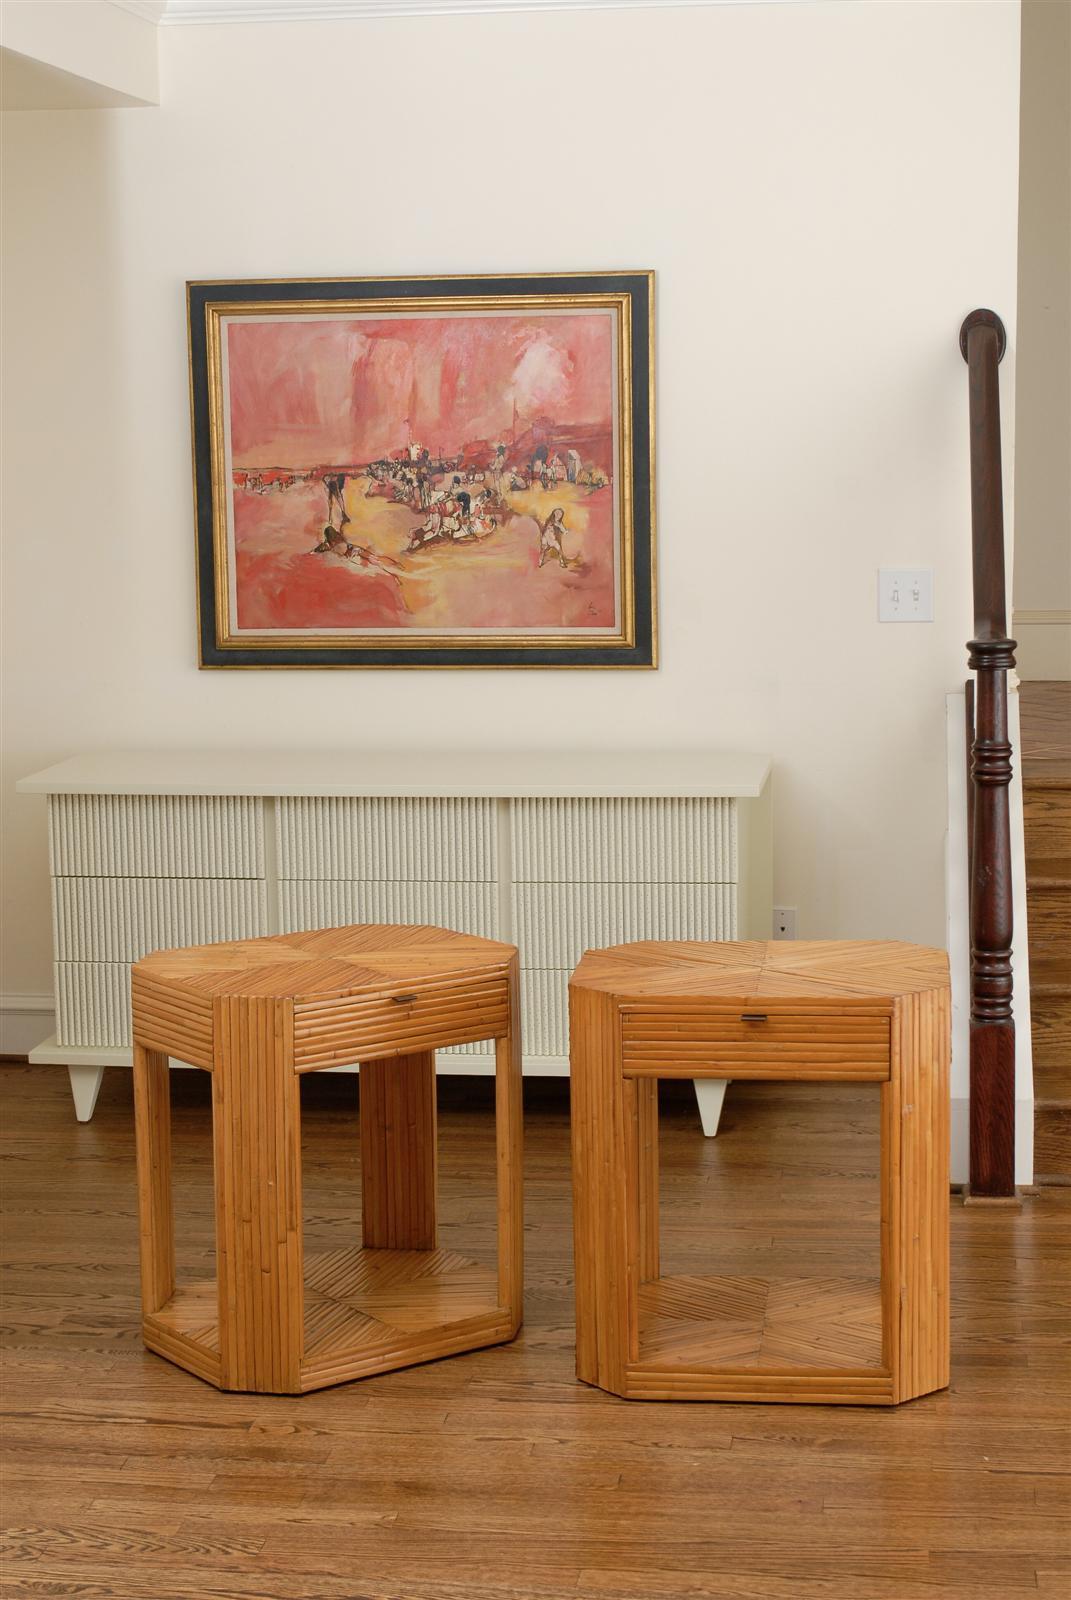 These magnificent end tables are shipped as professionally photographed and described in the listing narrative: Completely Installation Ready.

A stellar pair of vintage split bamboo end tables or nightstands. Individual bamboo pieces veneered